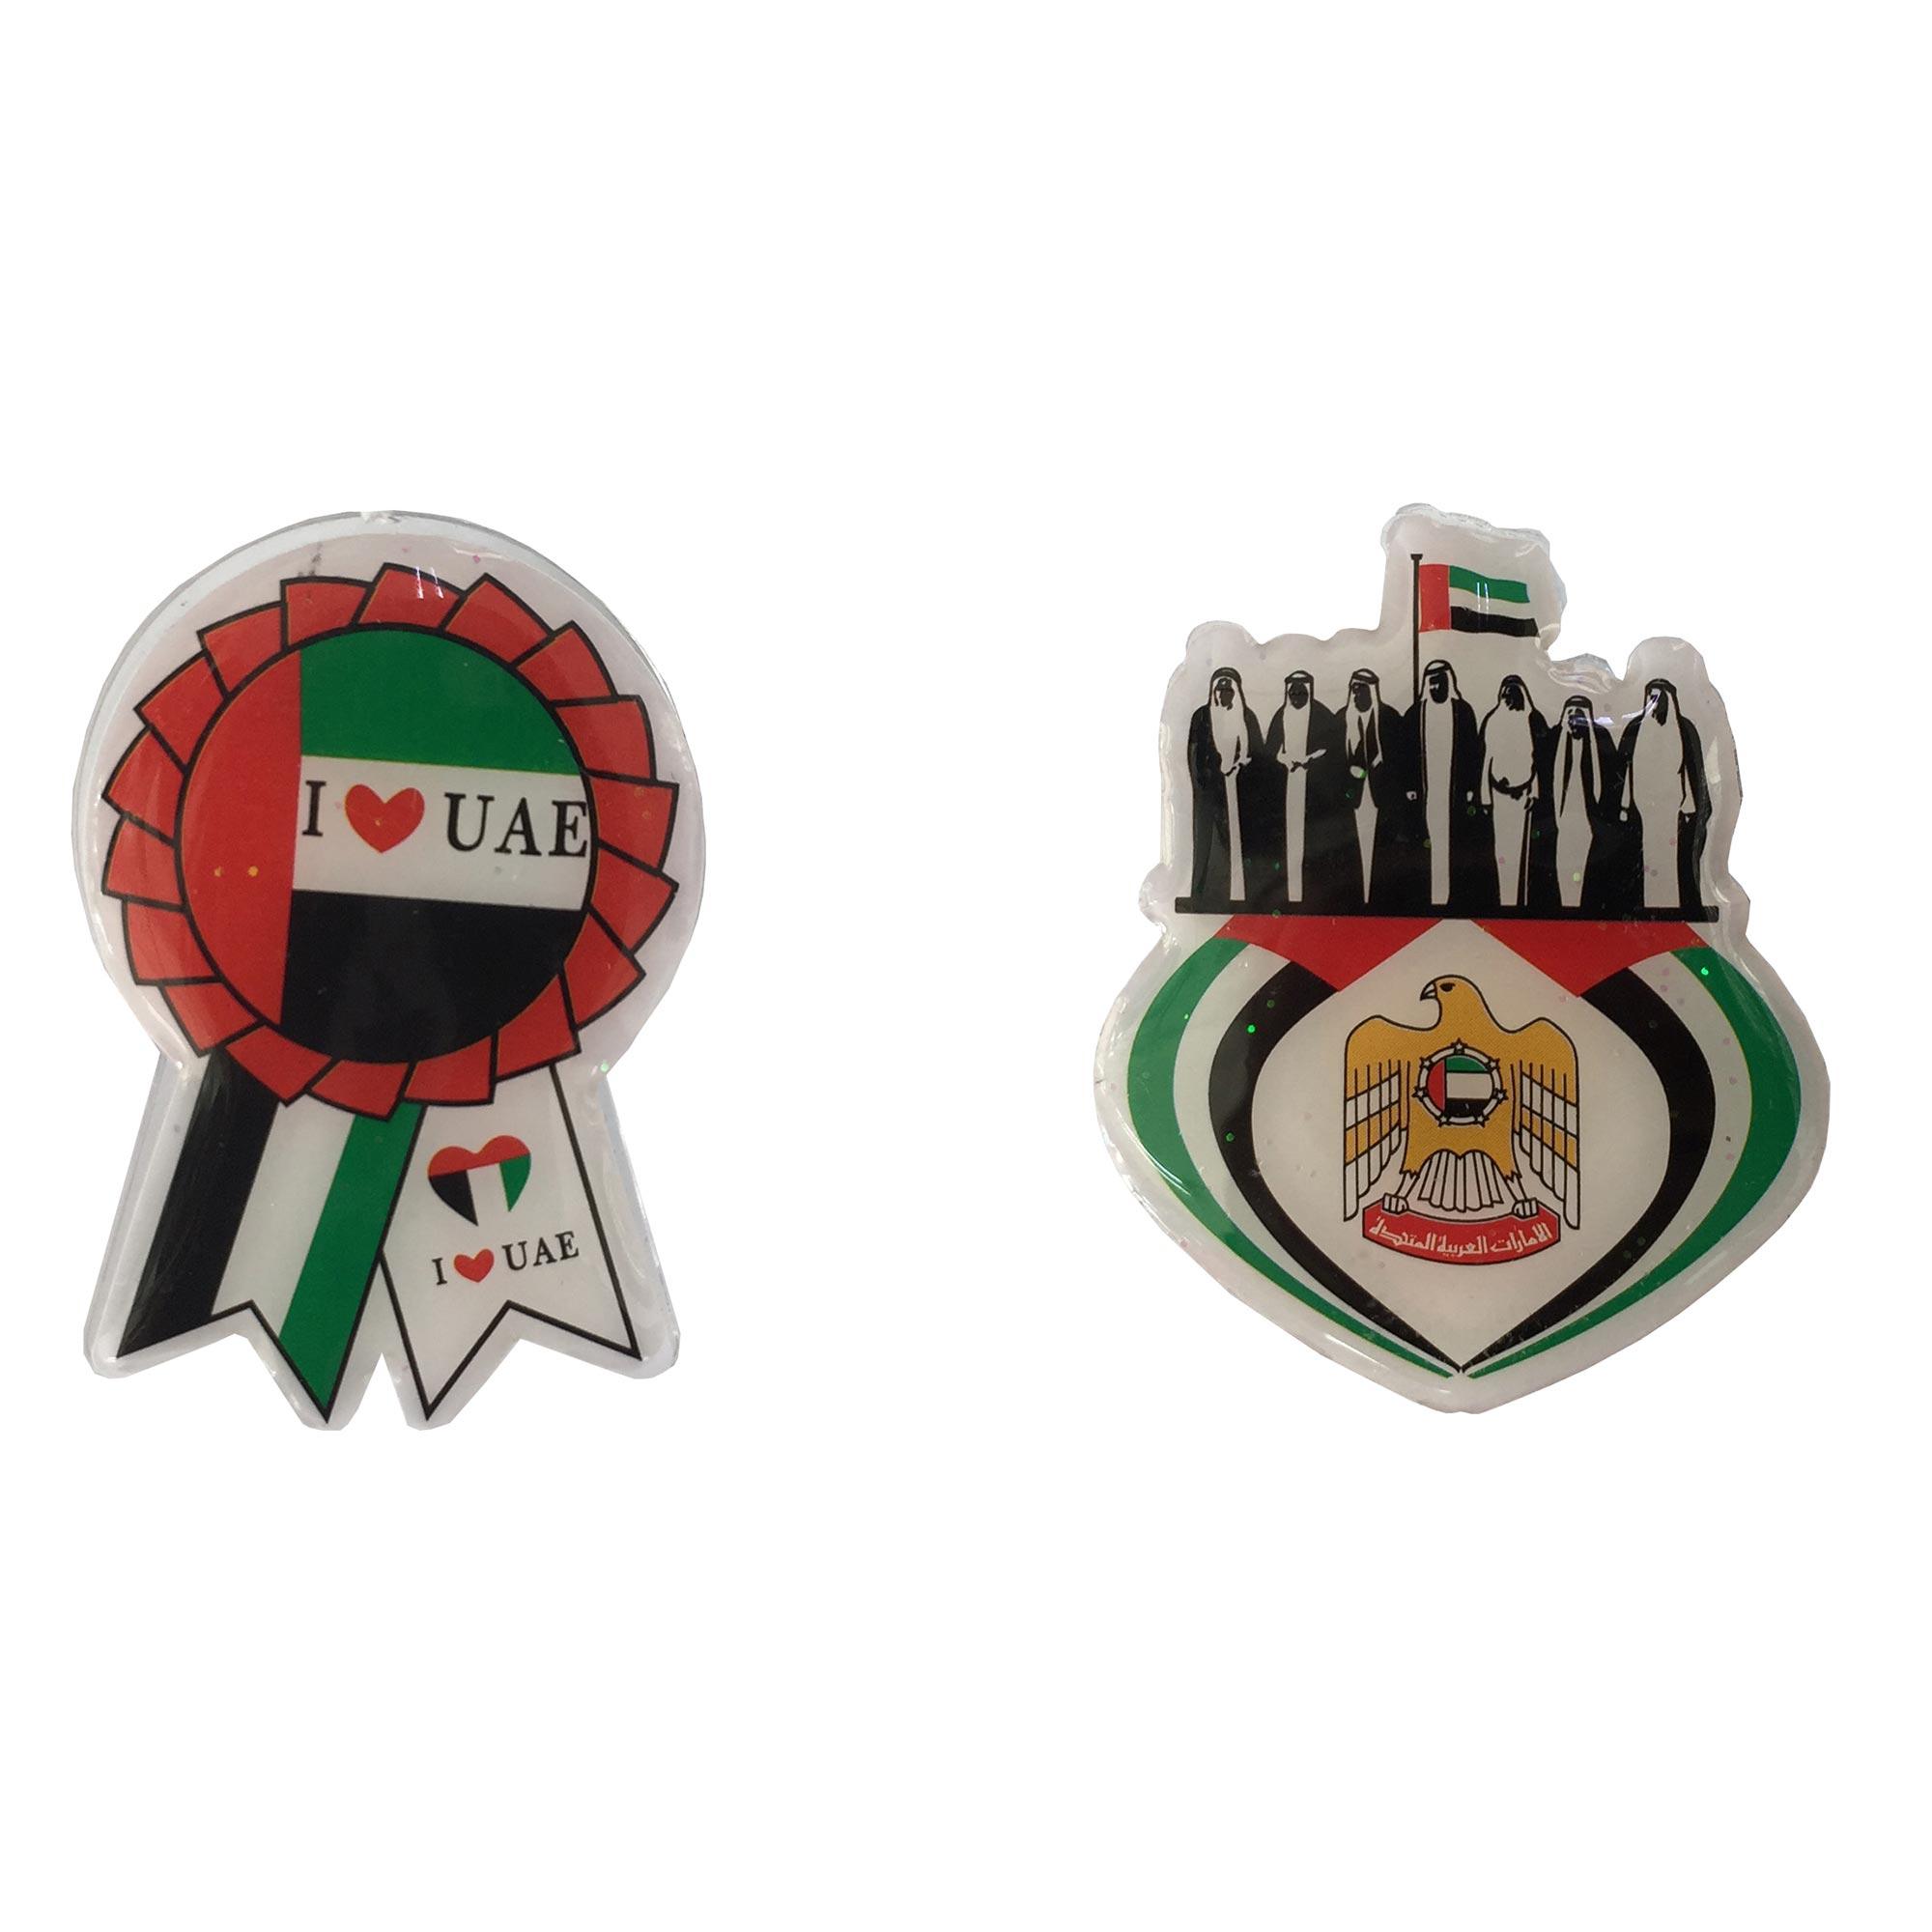 UAE Brooch With Light - Assorted (sold per piece) Costumes & Apparel - Party Centre